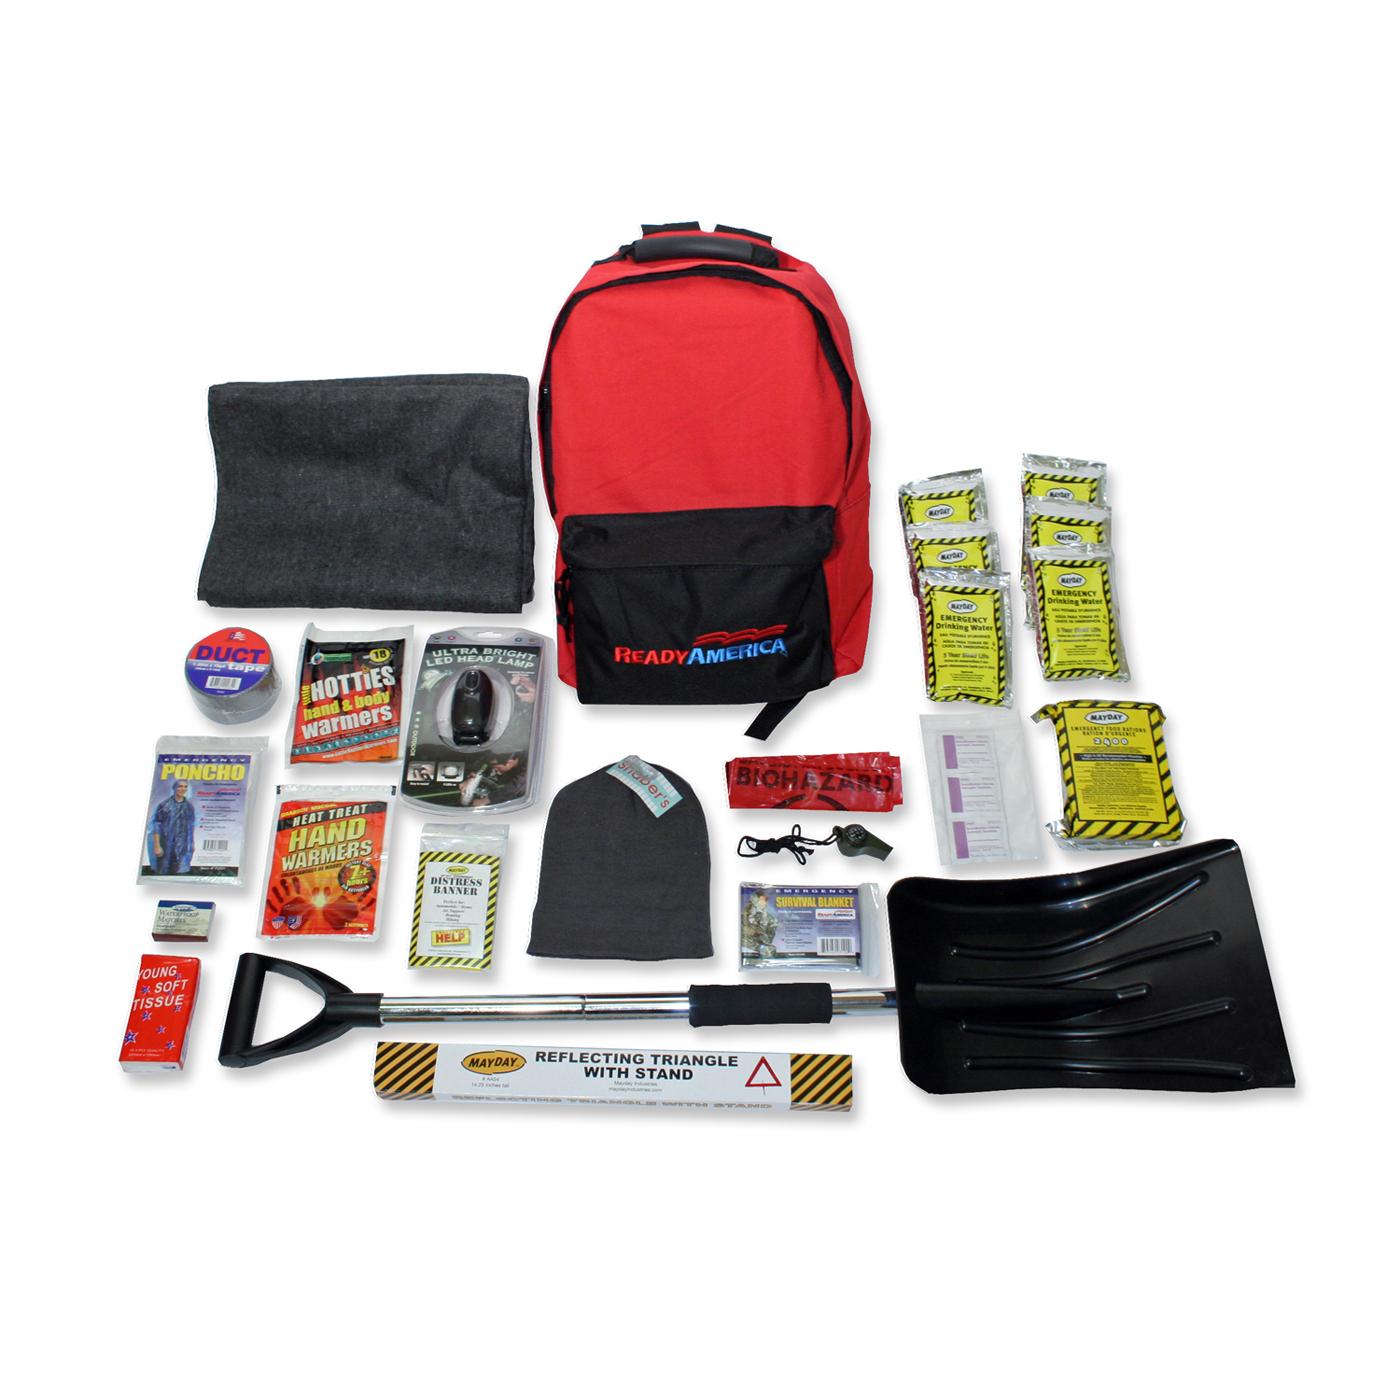 47 PIECES Survival Kit, Emergency Preparedness & Survival Kit, Medical Kit  for Car, Travel, Home, Office, Camping, Sports, Indoor, Outdoor, Go Bag |  Lazada PH